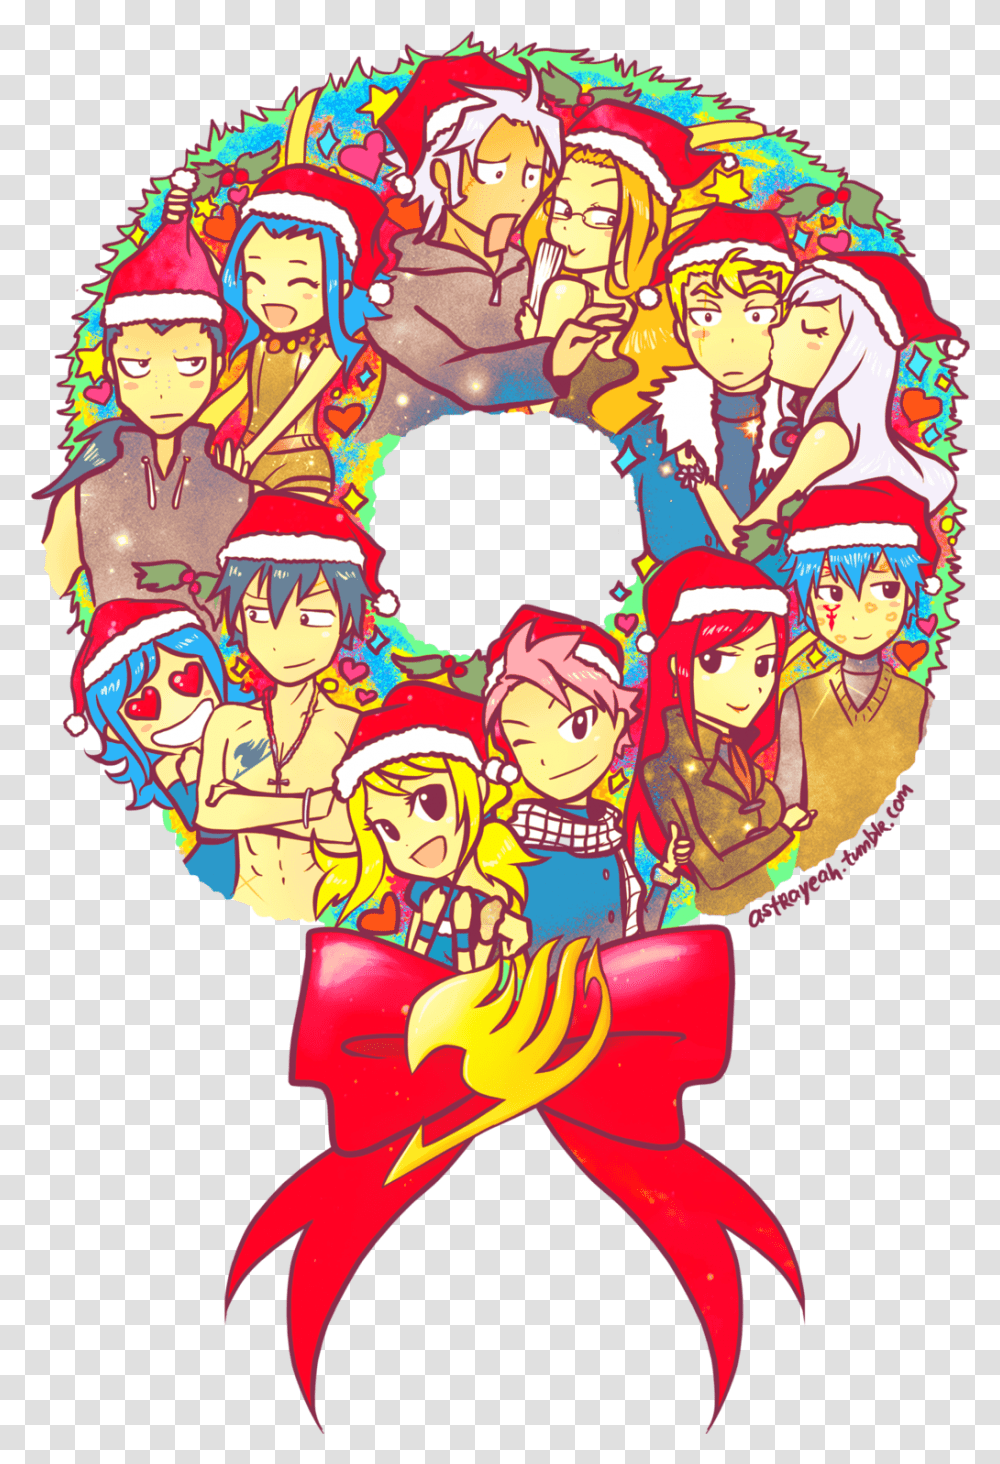 Gruviapon 195 34 Fairy Tail Christmas 2013 By Astrayeah Fairy Tail Christmas, Collage, Poster, Advertisement, Label Transparent Png